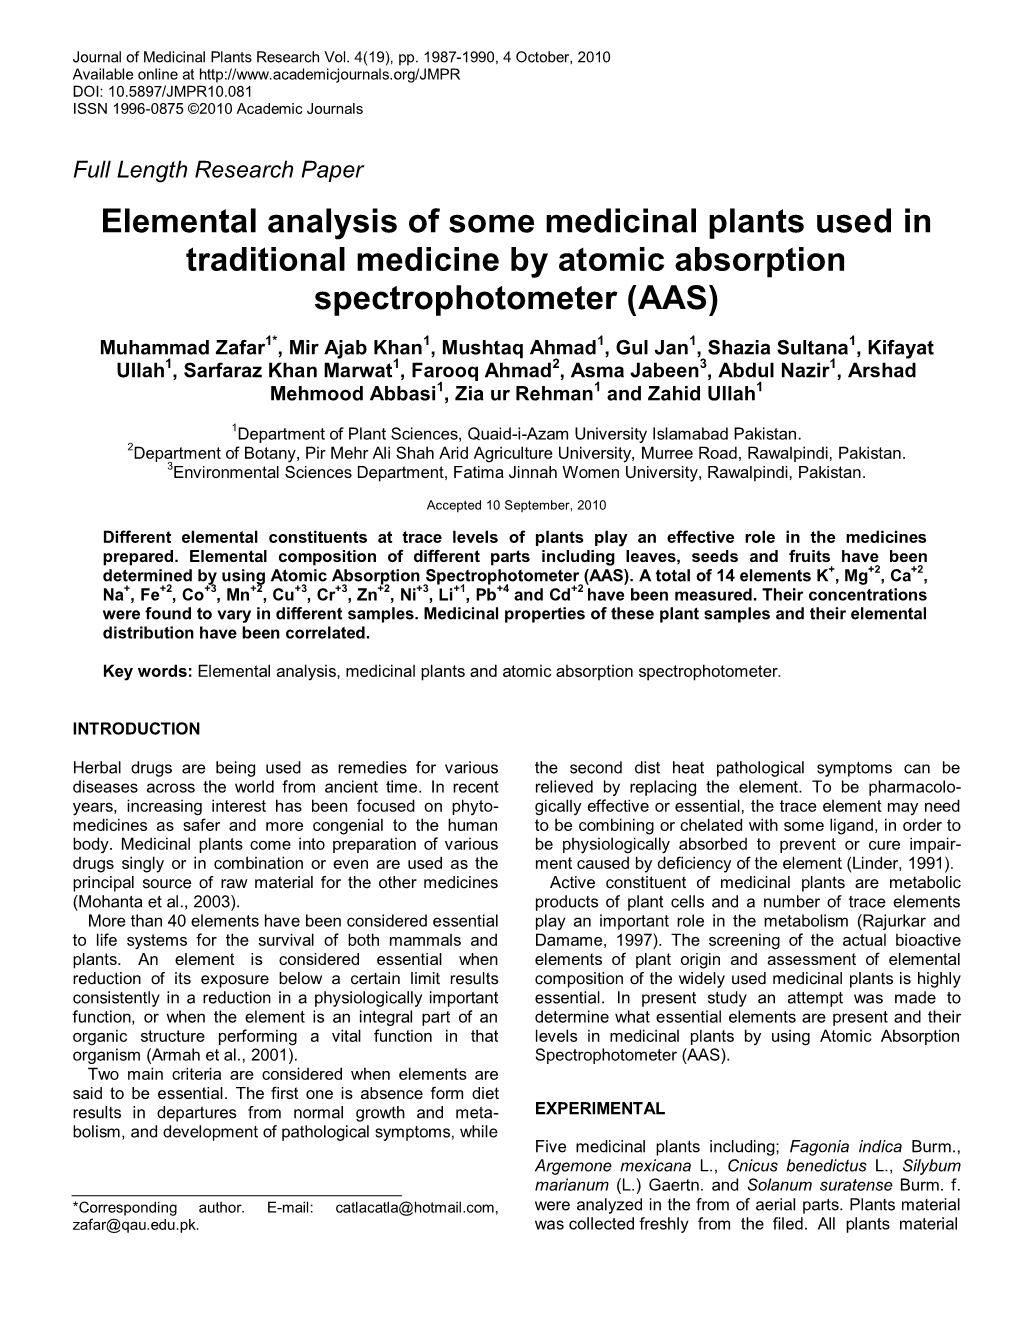 Elemental Analysis of Some Medicinal Plants By